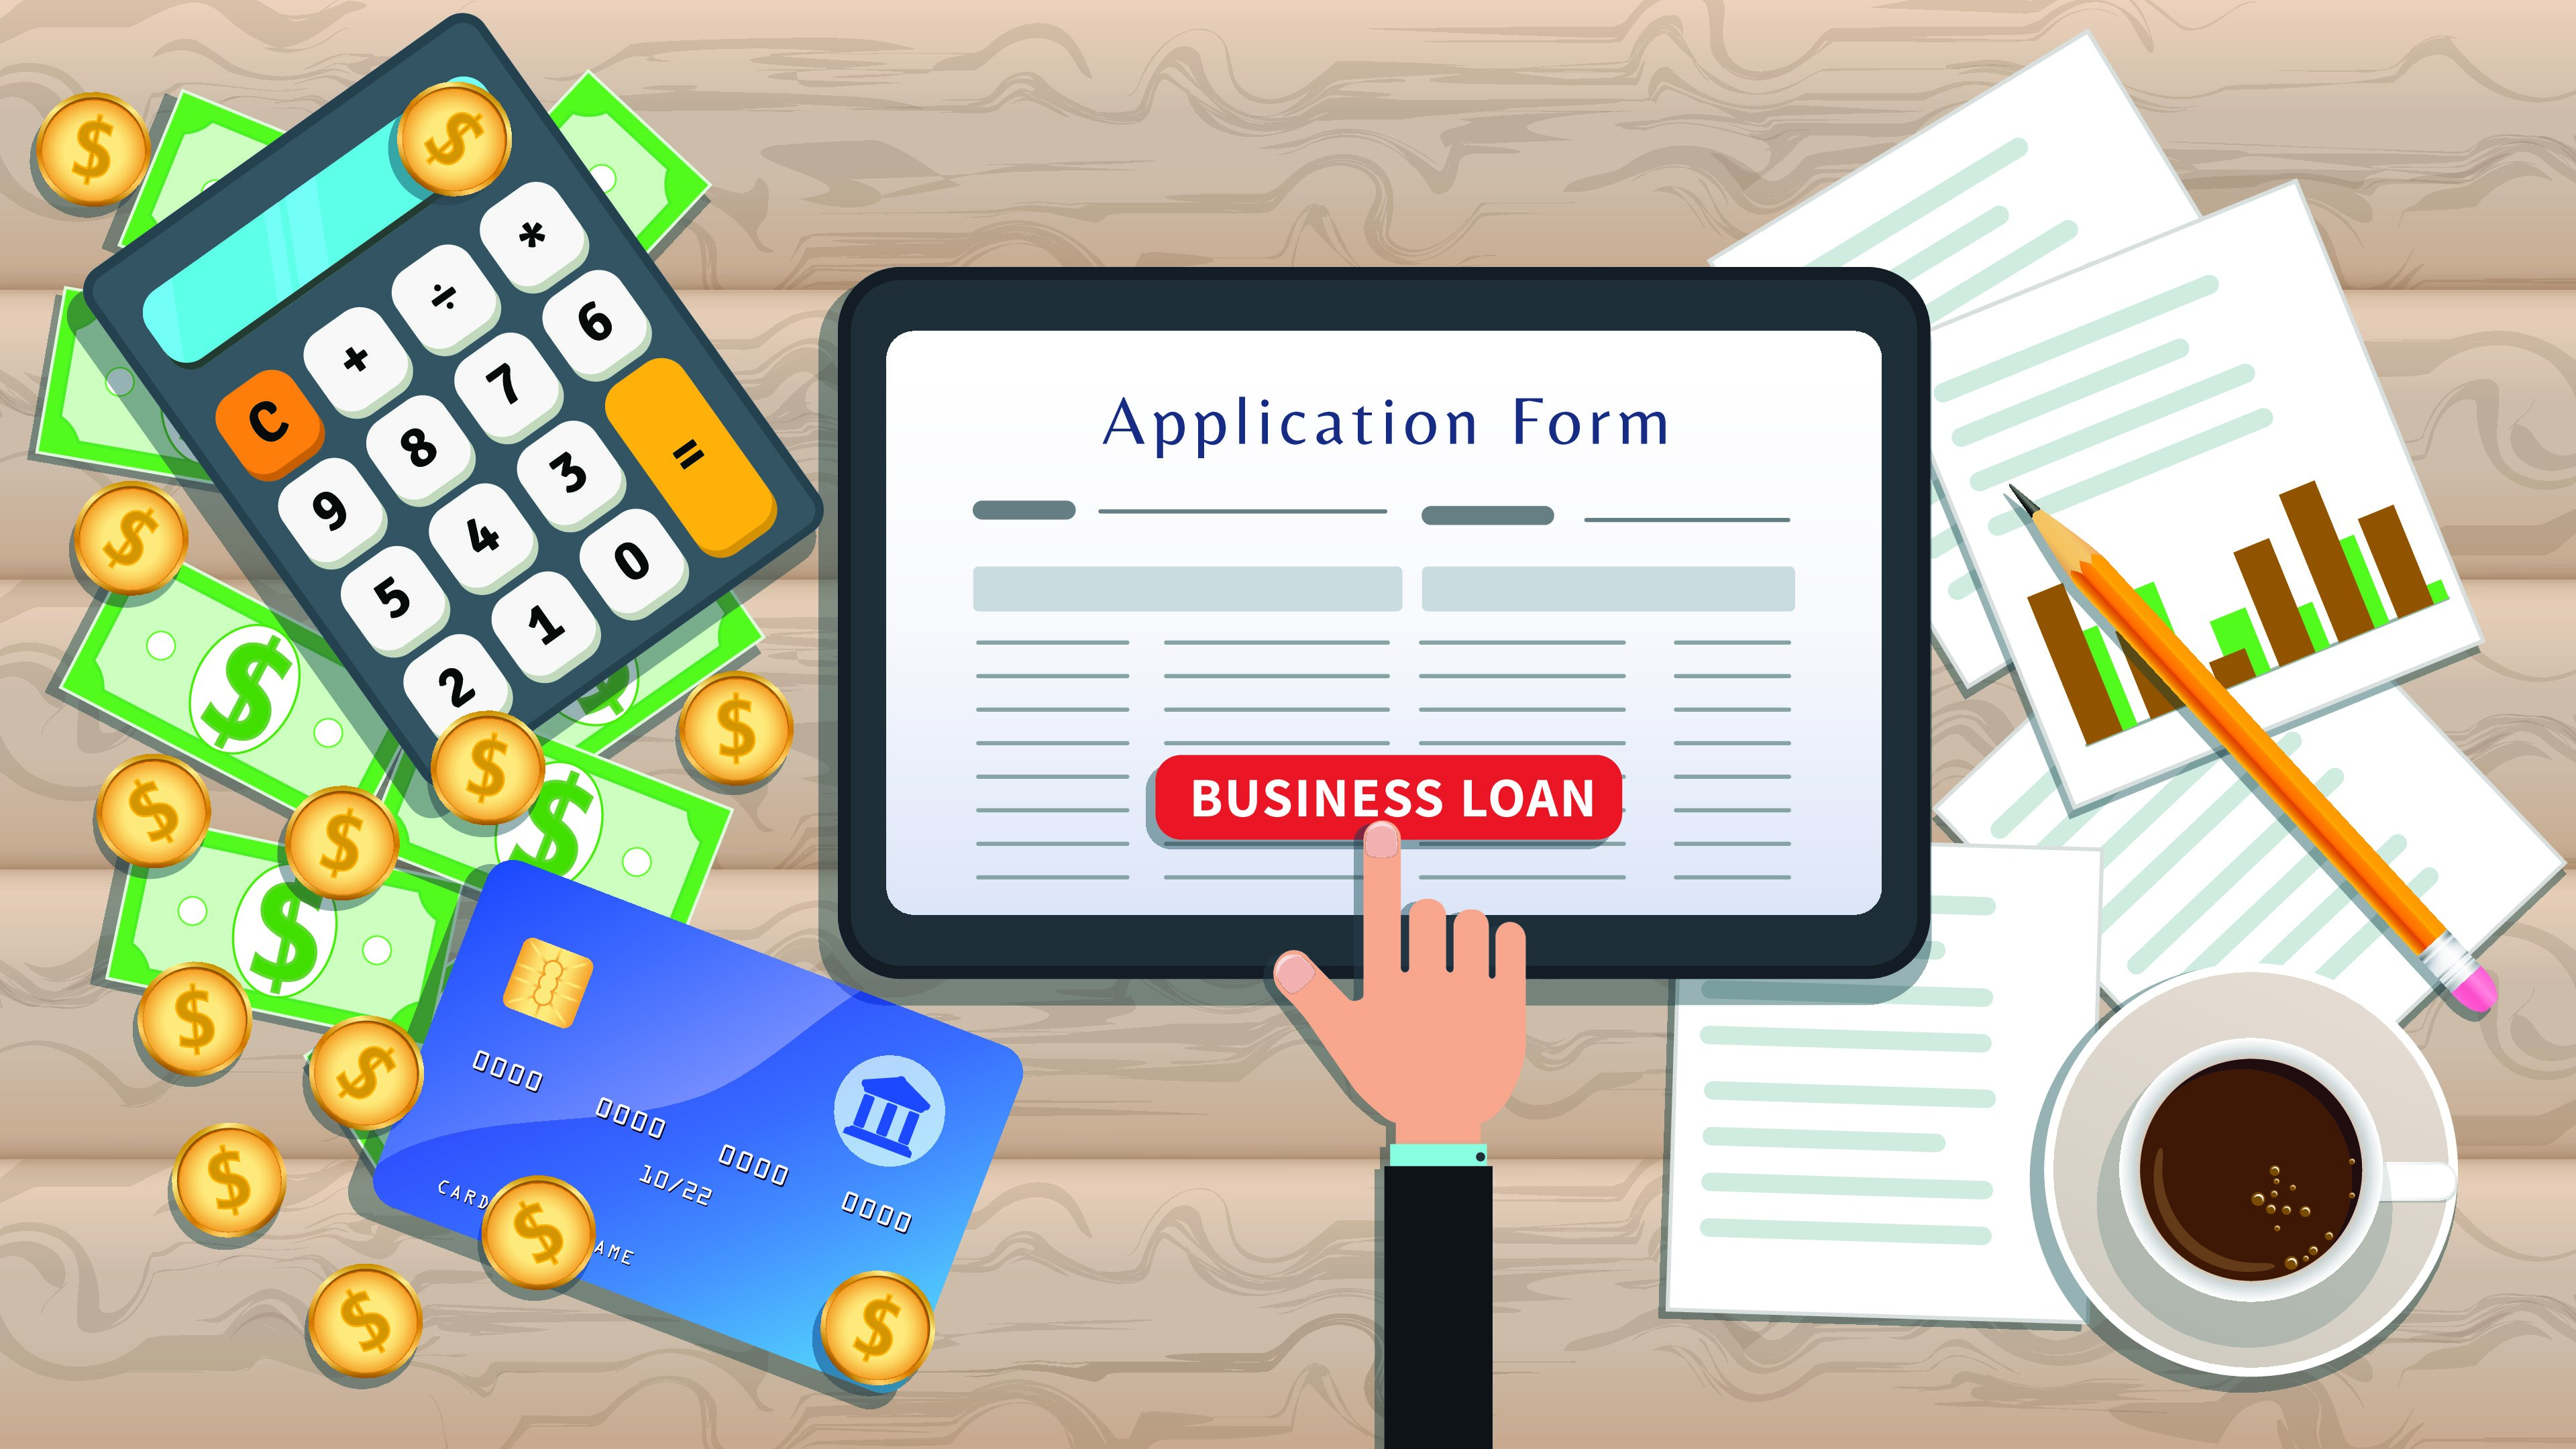 How CIBIL score affects your Business Loan application | Fedfina